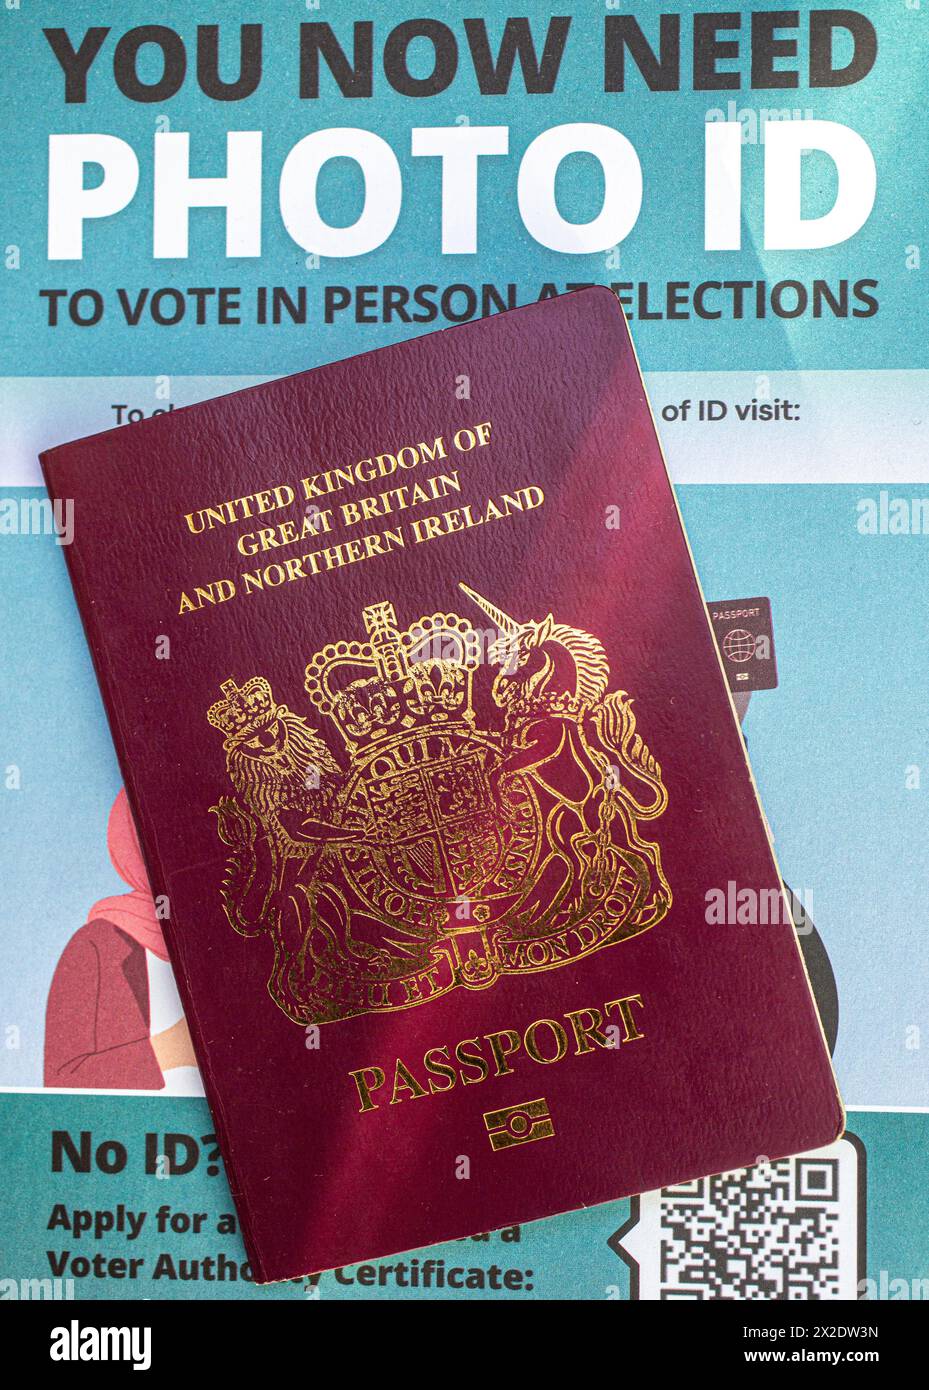 British passport with a leaflet showing that voters in England will need to show a photo ID to vote at polling stations in some elections. UK Stock Photo